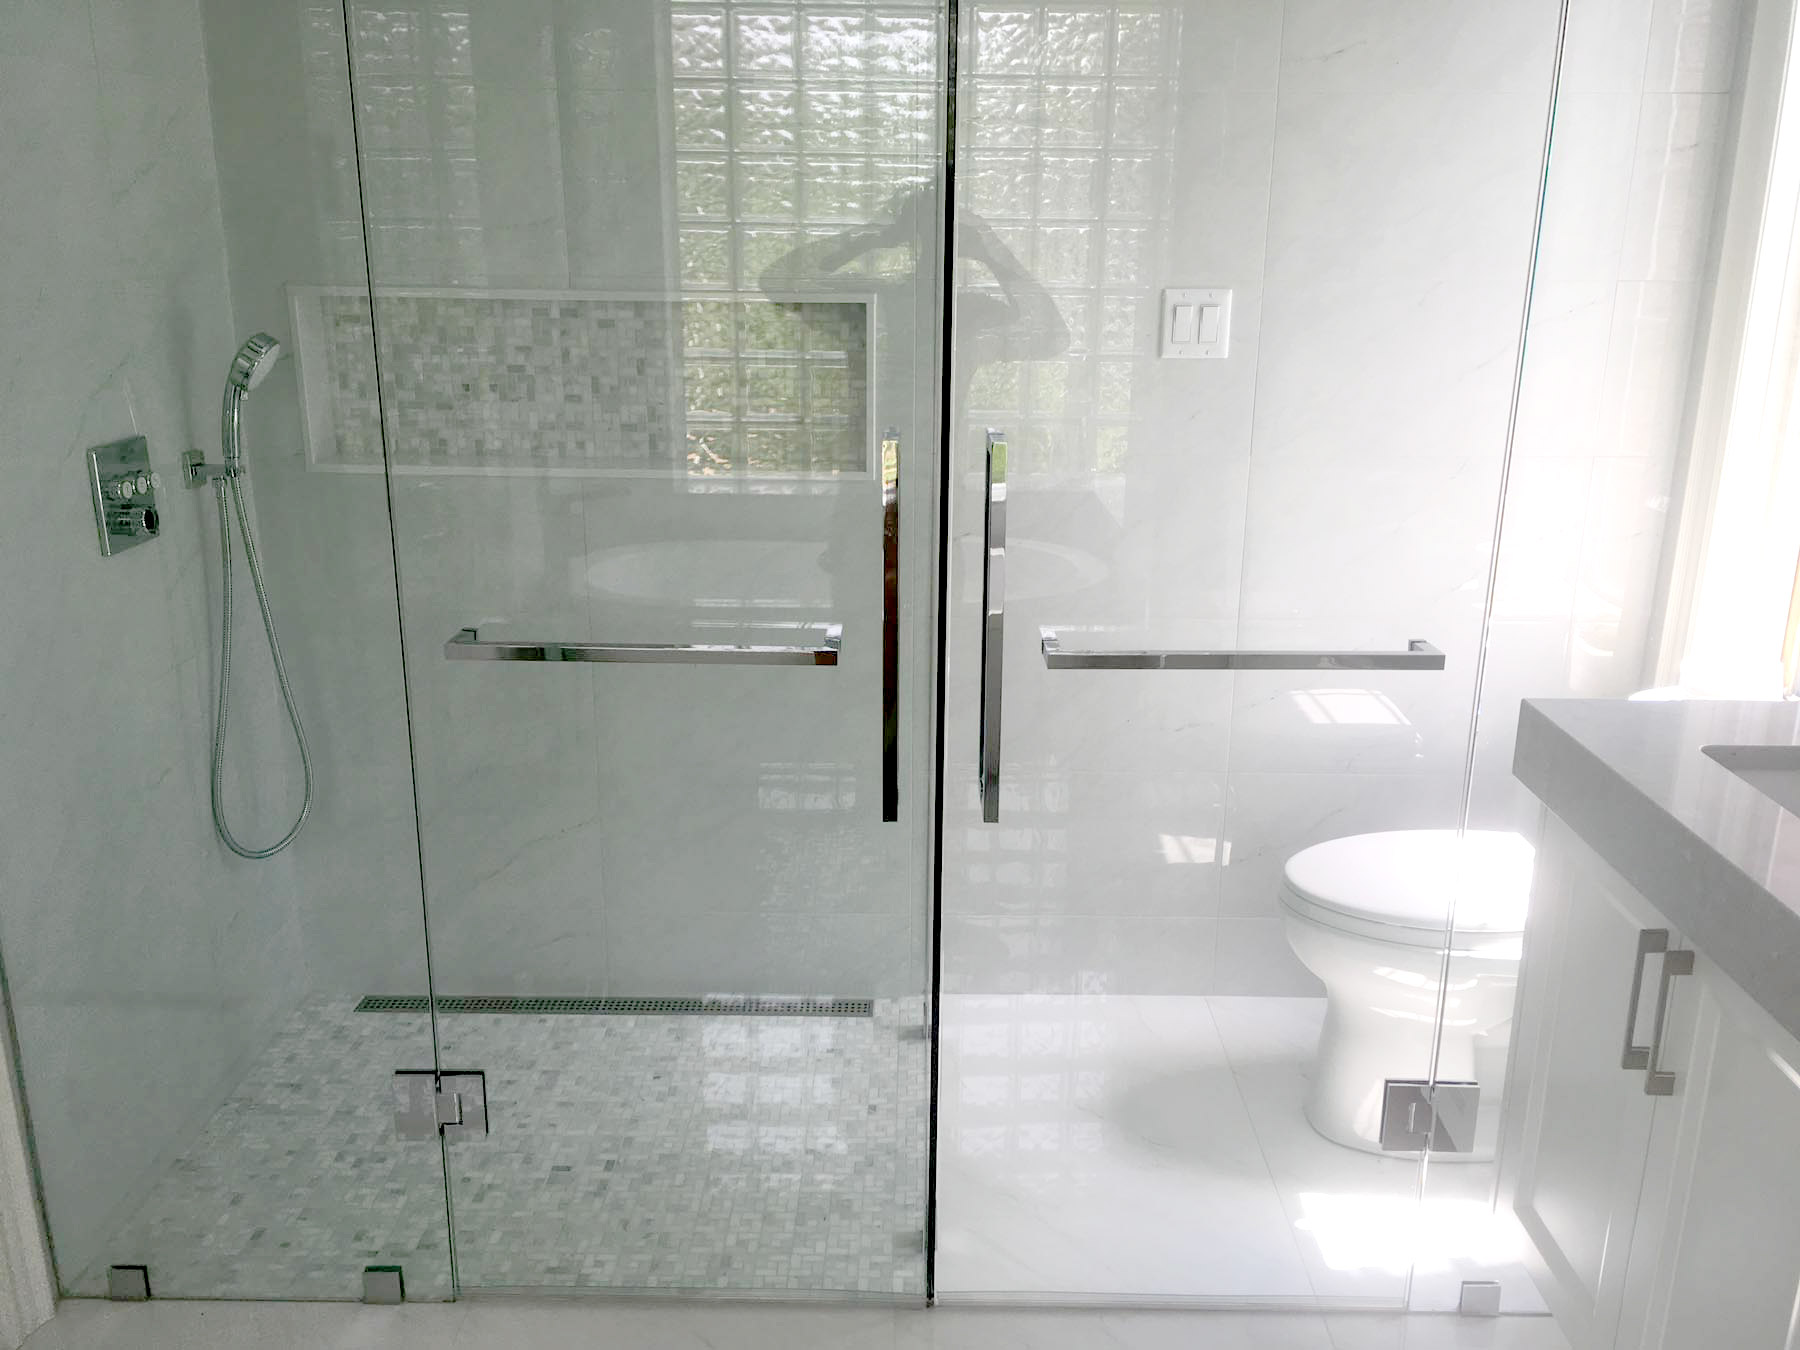 shower and toilet area enclosed by glass